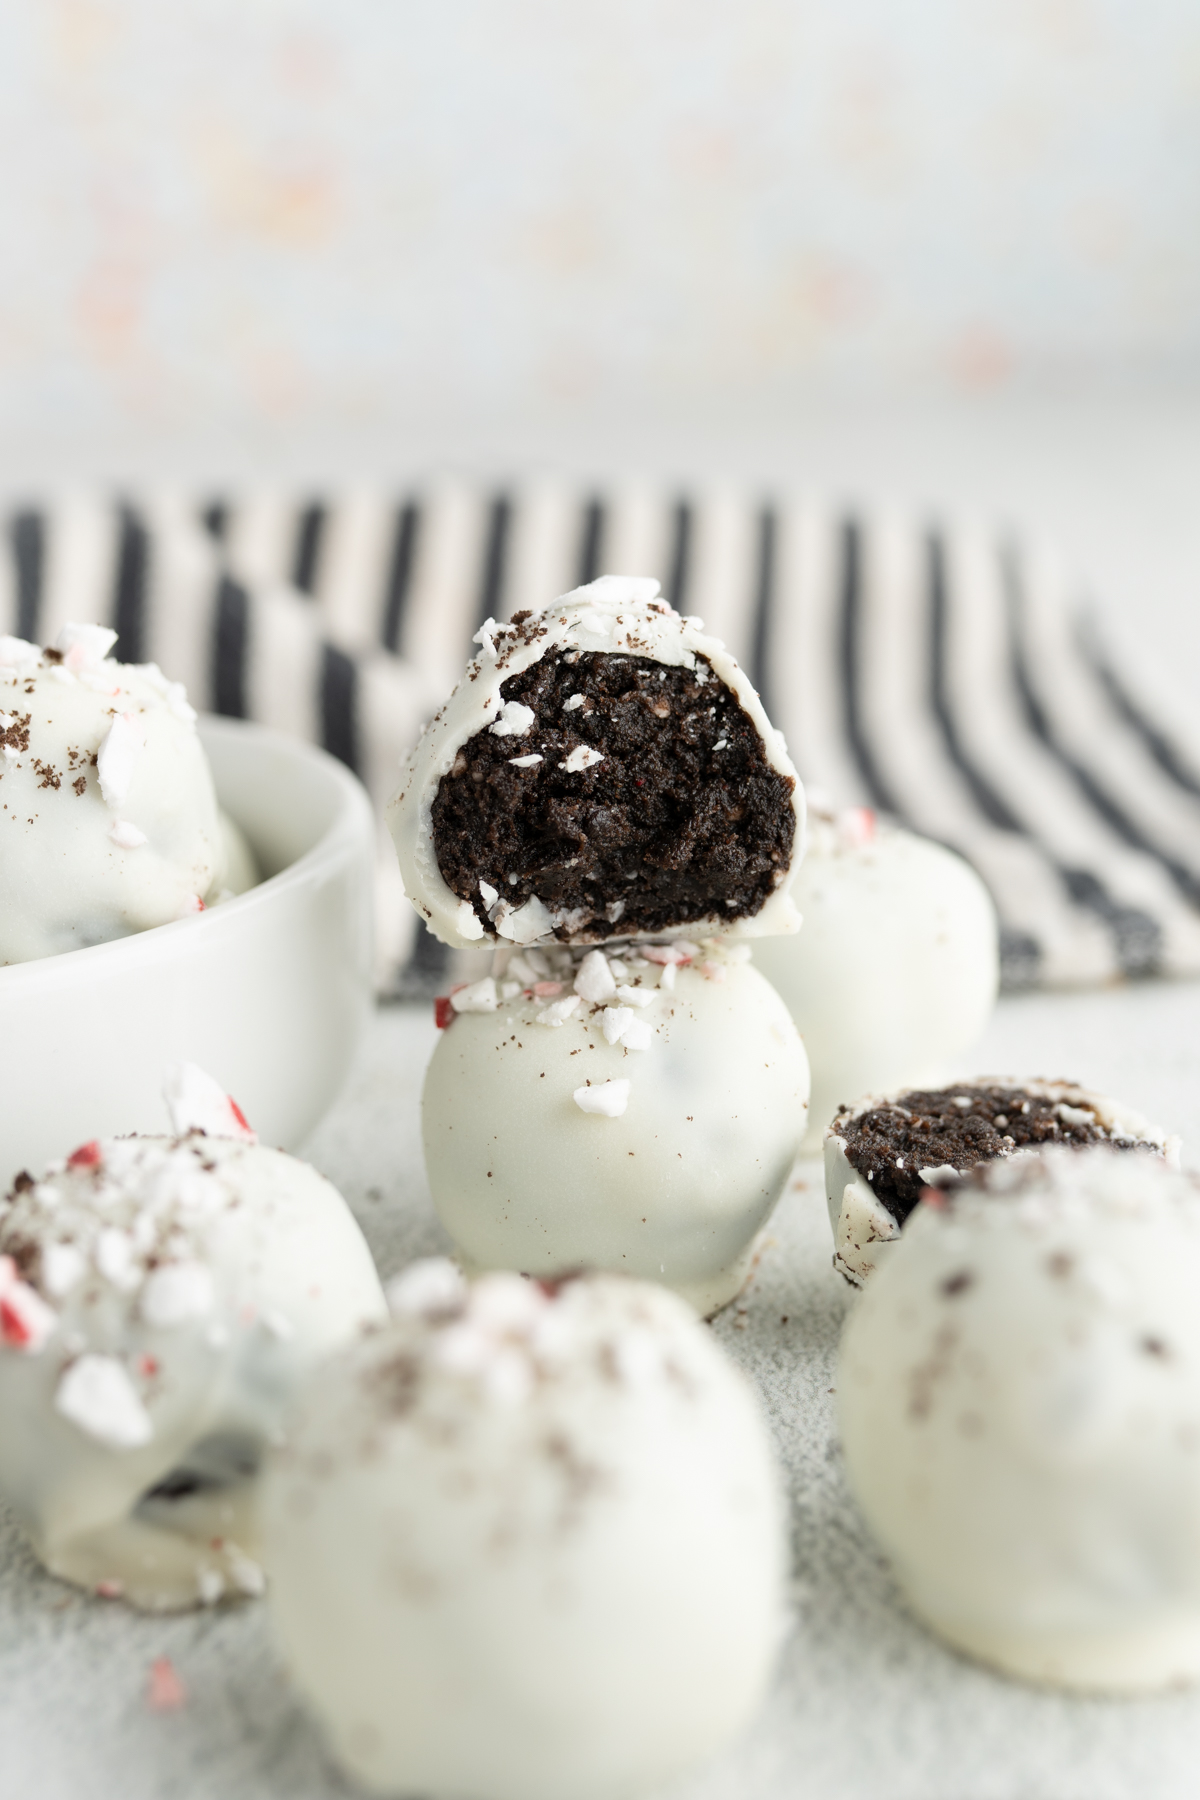 Peppermint oreo truffle balls on the counter. One truffle has a bite taken out of it and is stacked on top of a full one.